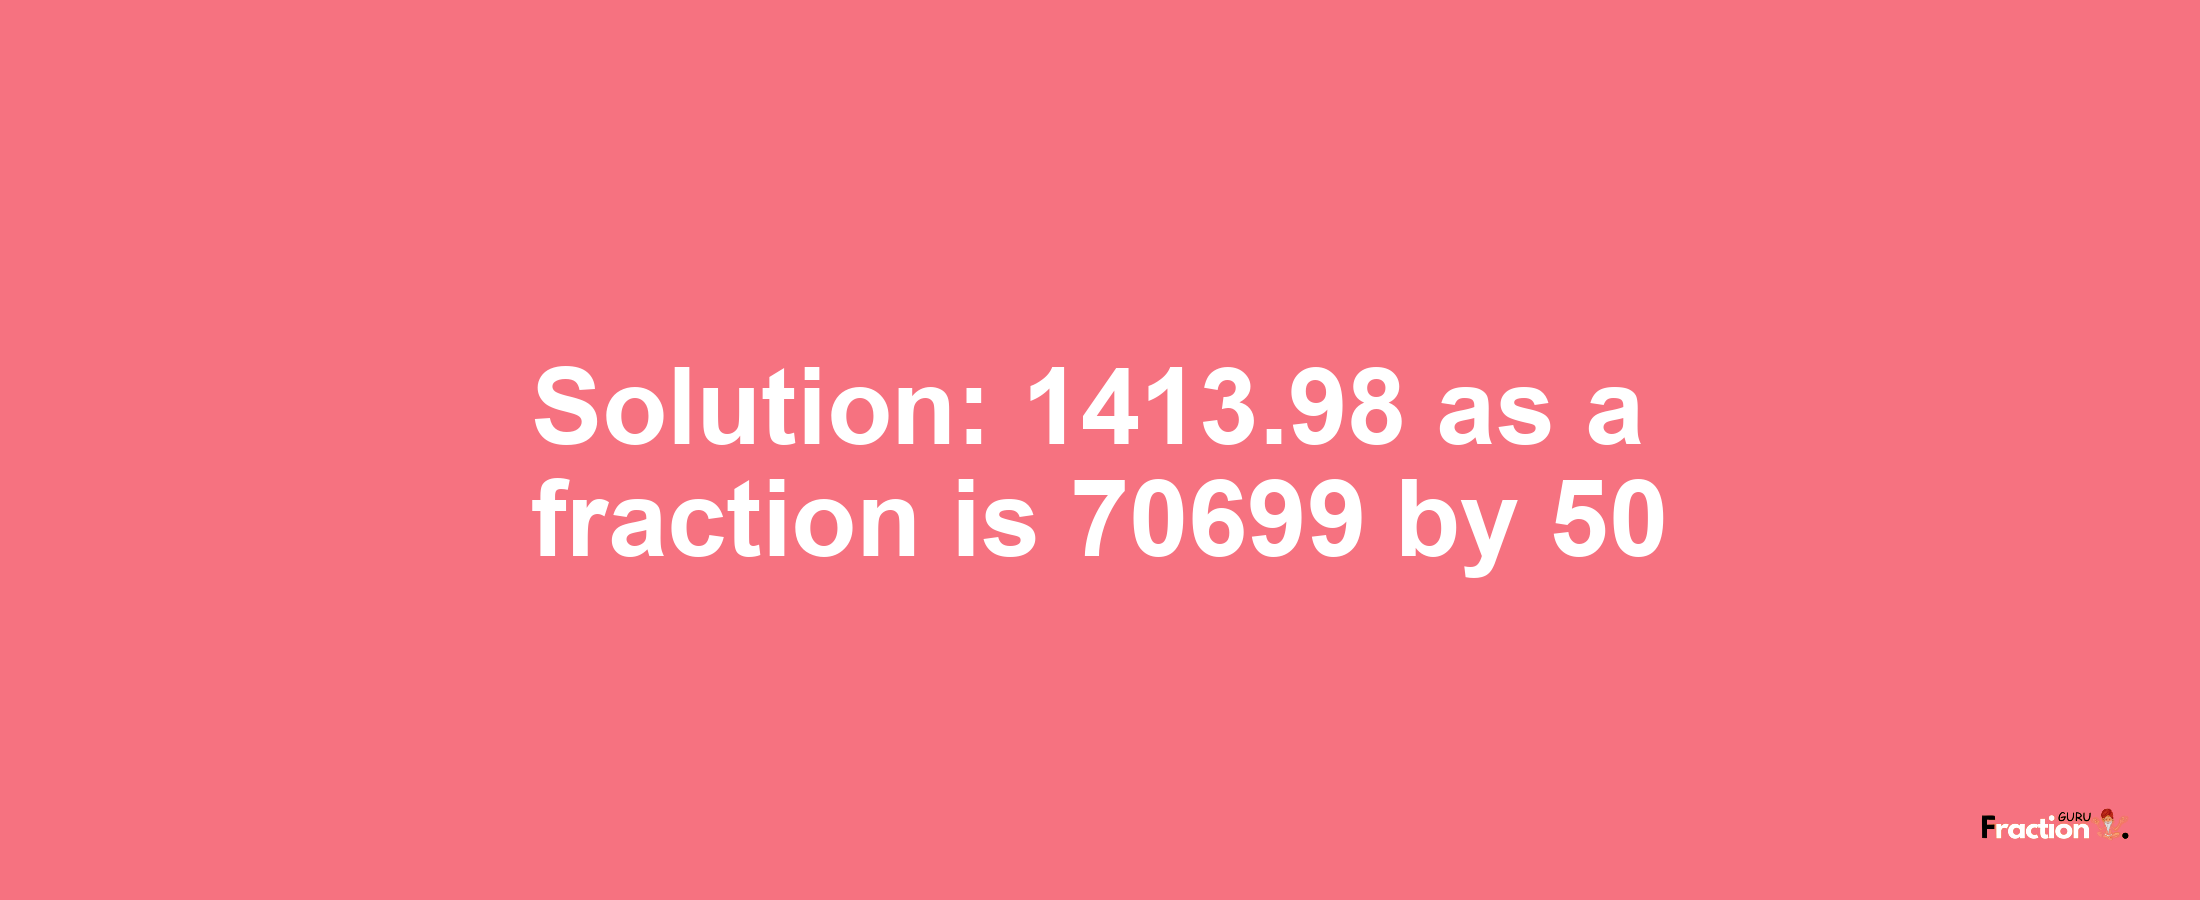 Solution:1413.98 as a fraction is 70699/50